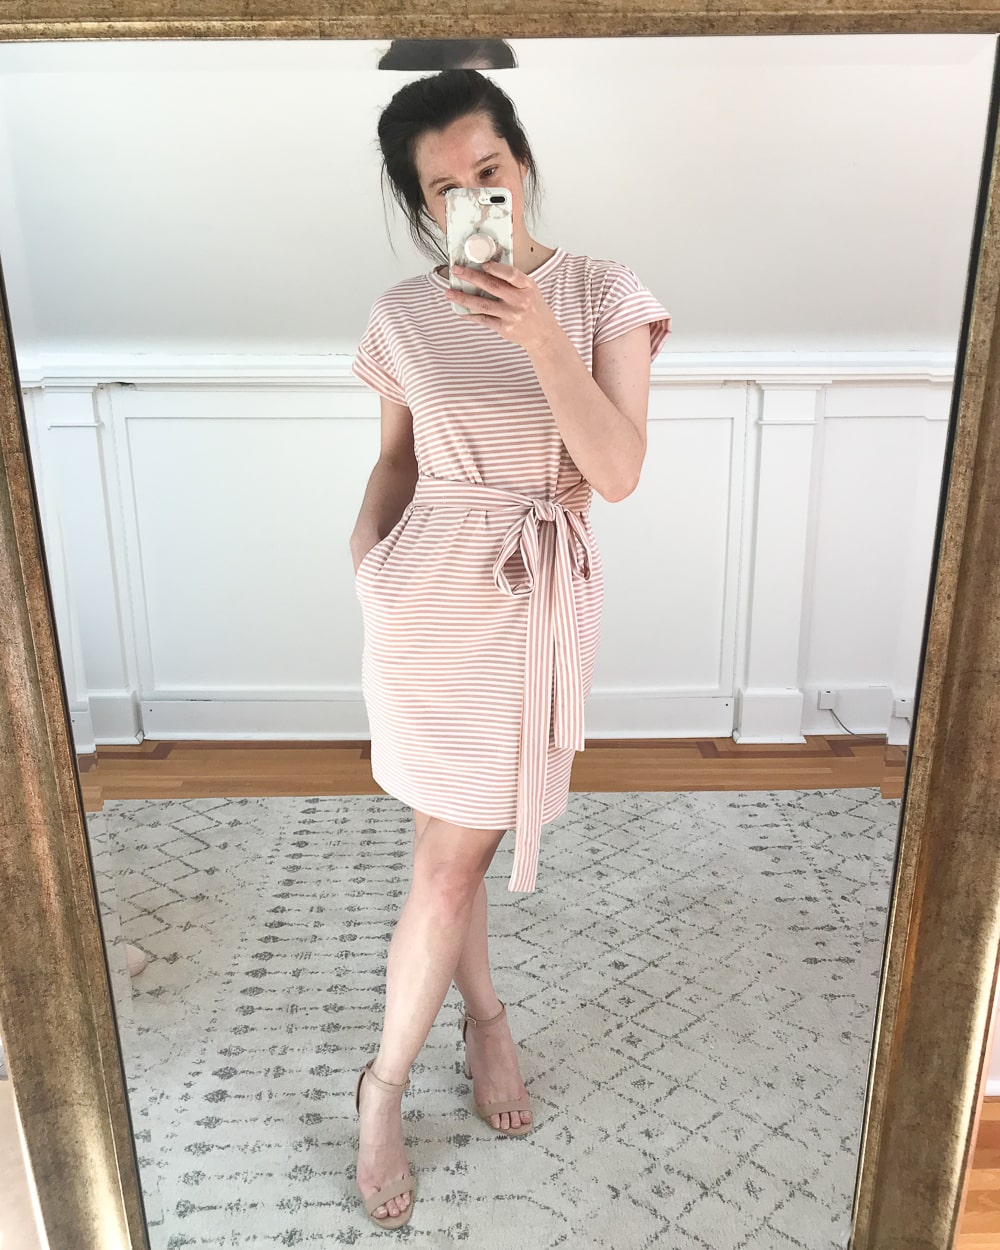 Amazon casual striped dress in dusty pink tried on by affordable fashion blogger Stephanie Ziajka on Diary of a Debutante